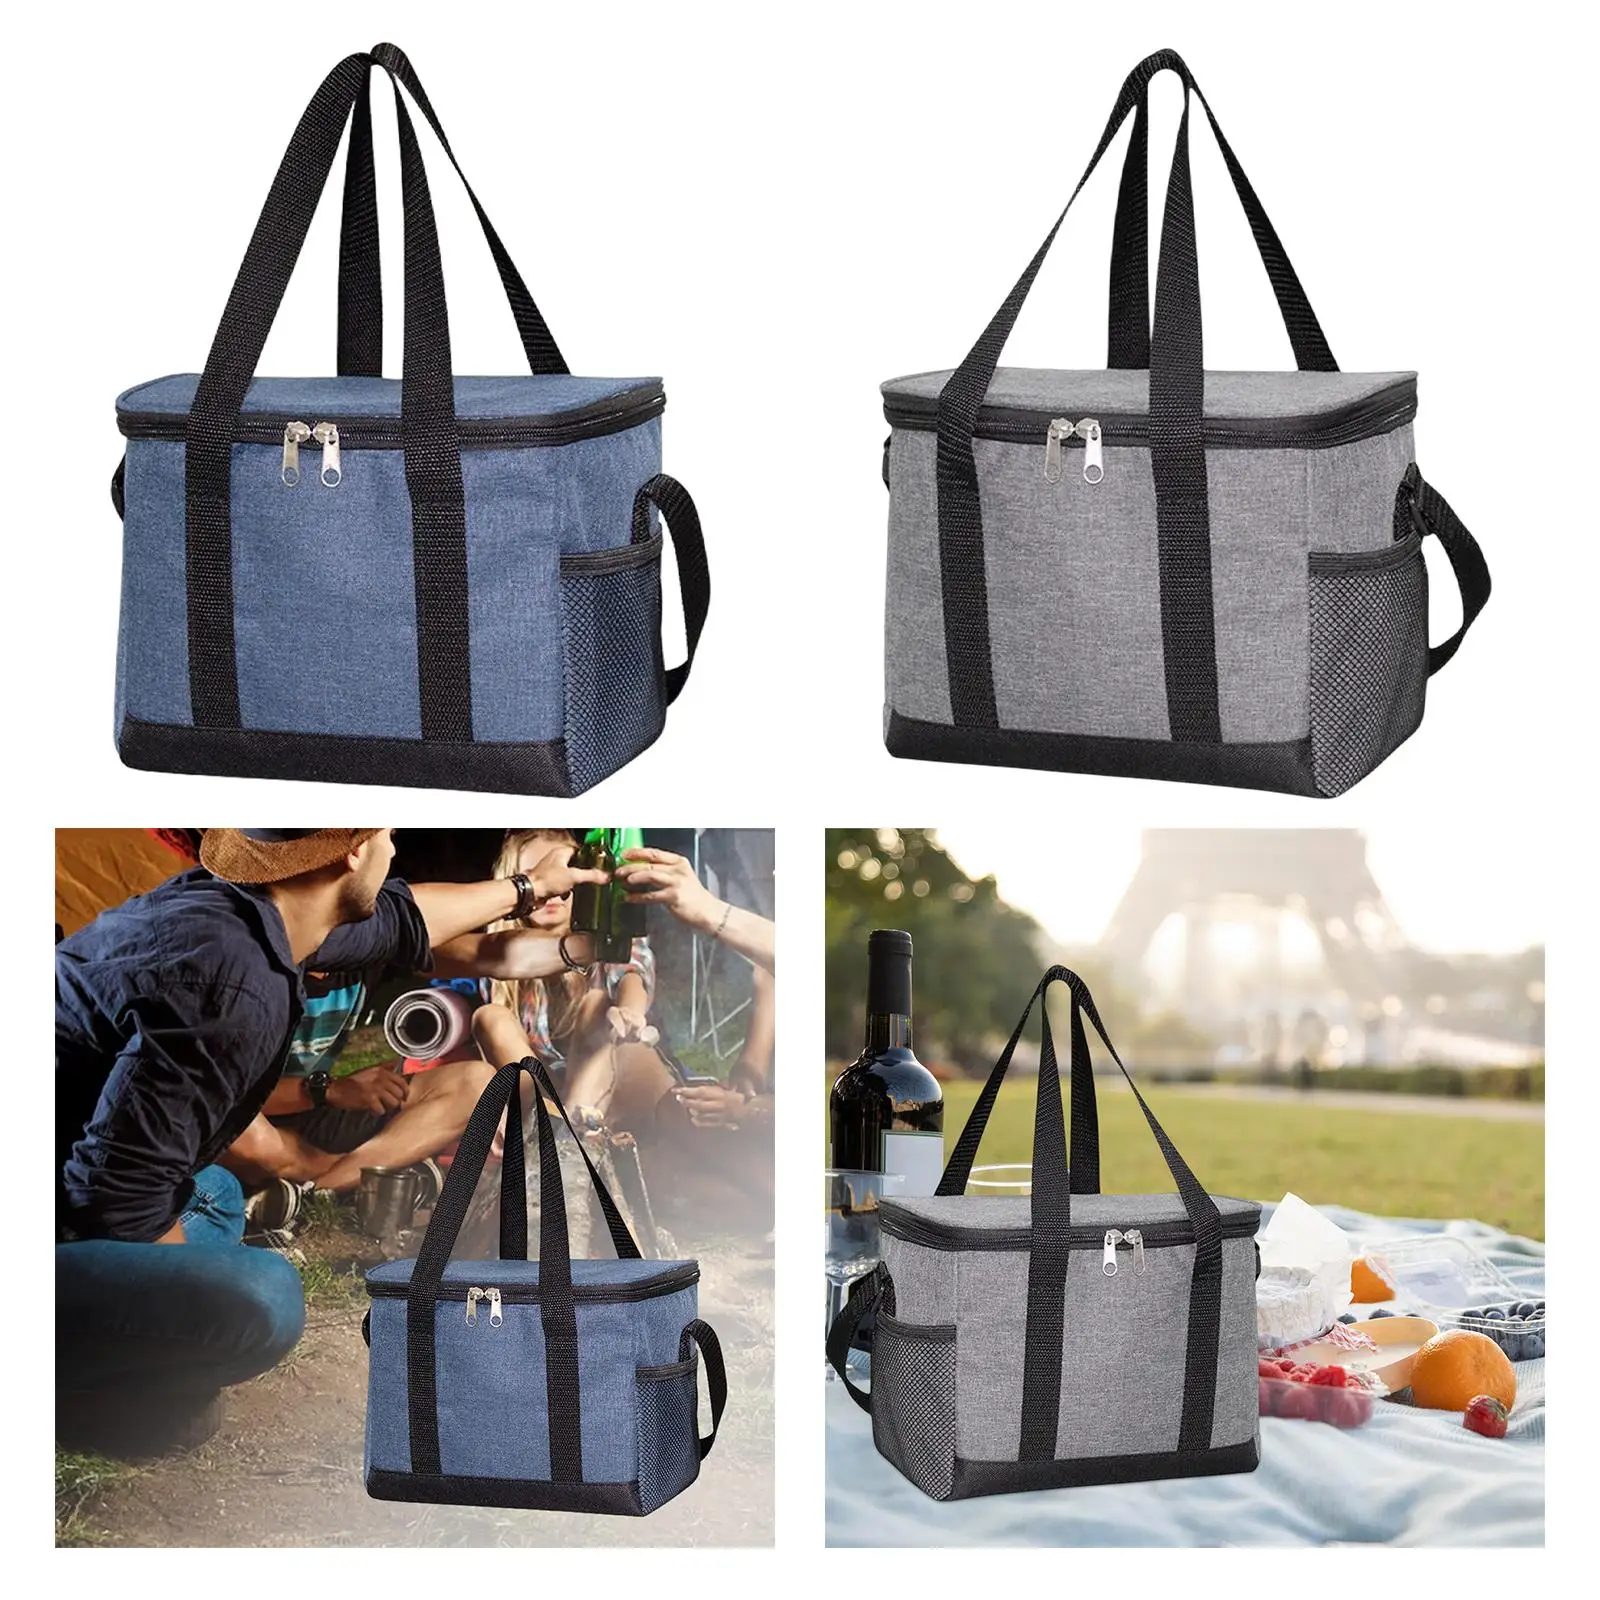 Insulated Lunch Shopping Bag Reusable Insulated Grocery Bag for Camping Car